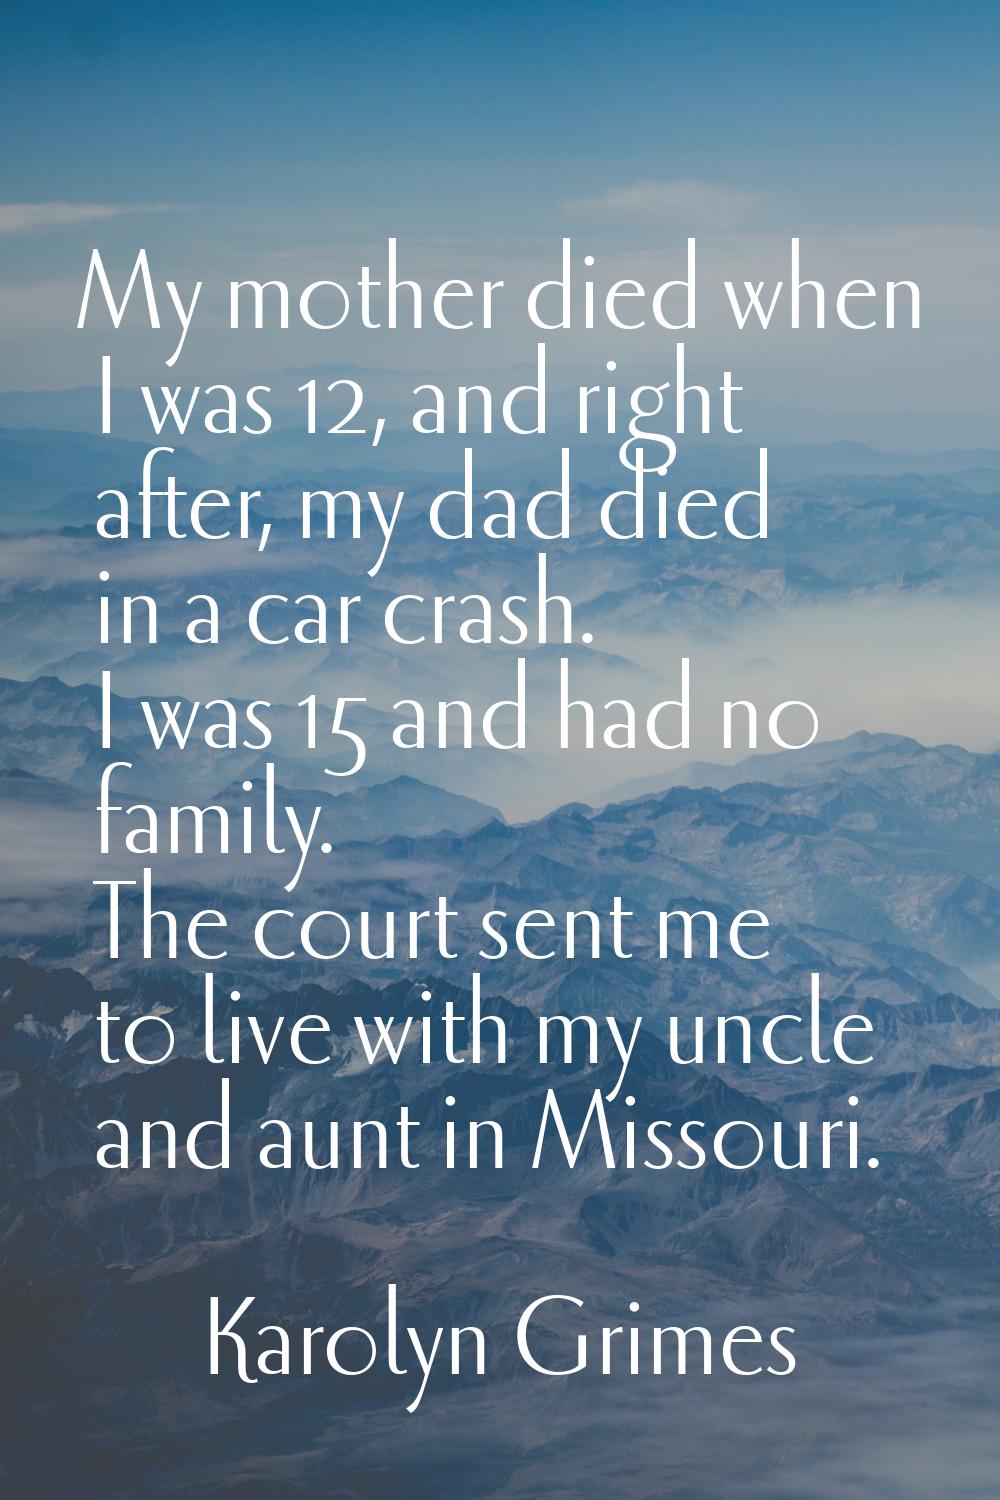 My mother died when I was 12, and right after, my dad died in a car crash. I was 15 and had no fami